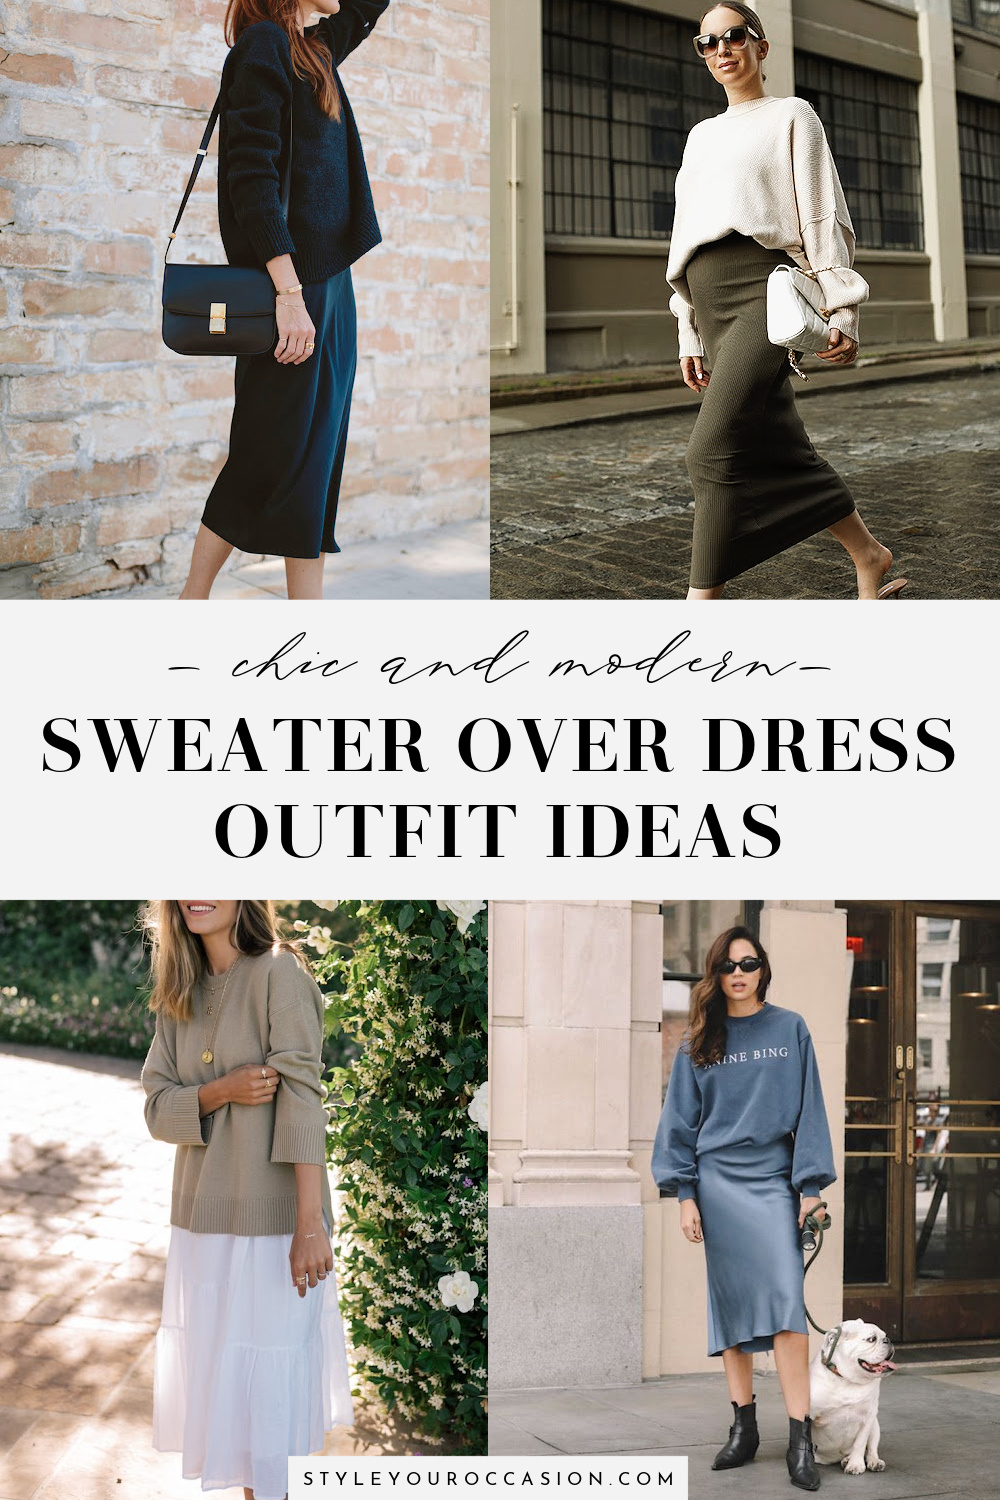 How To Wear A Sweater Over Dress: Chic Outfits + Tips To Own This Look!